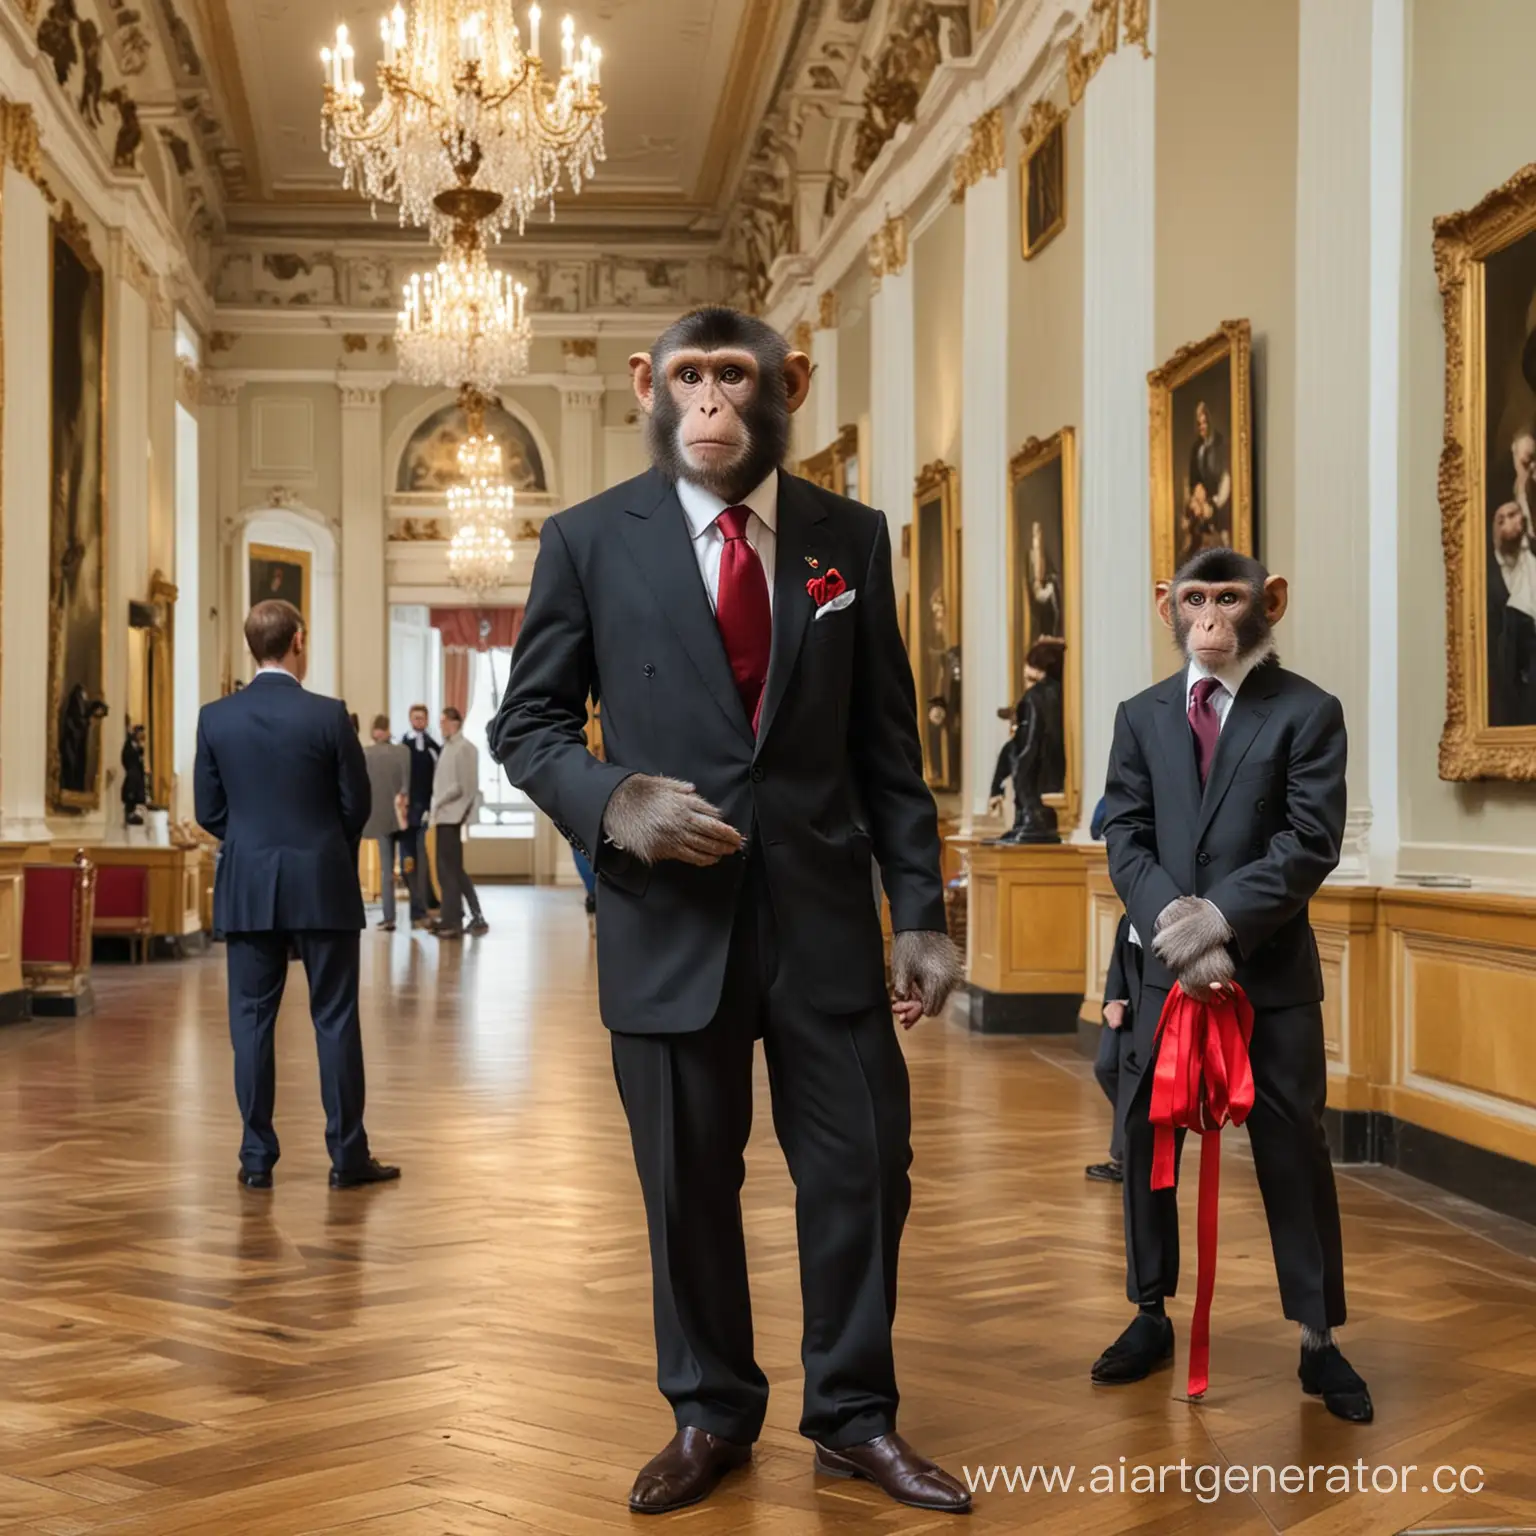 Monkeys-in-Suits-Guided-Tour-at-the-Hermitage